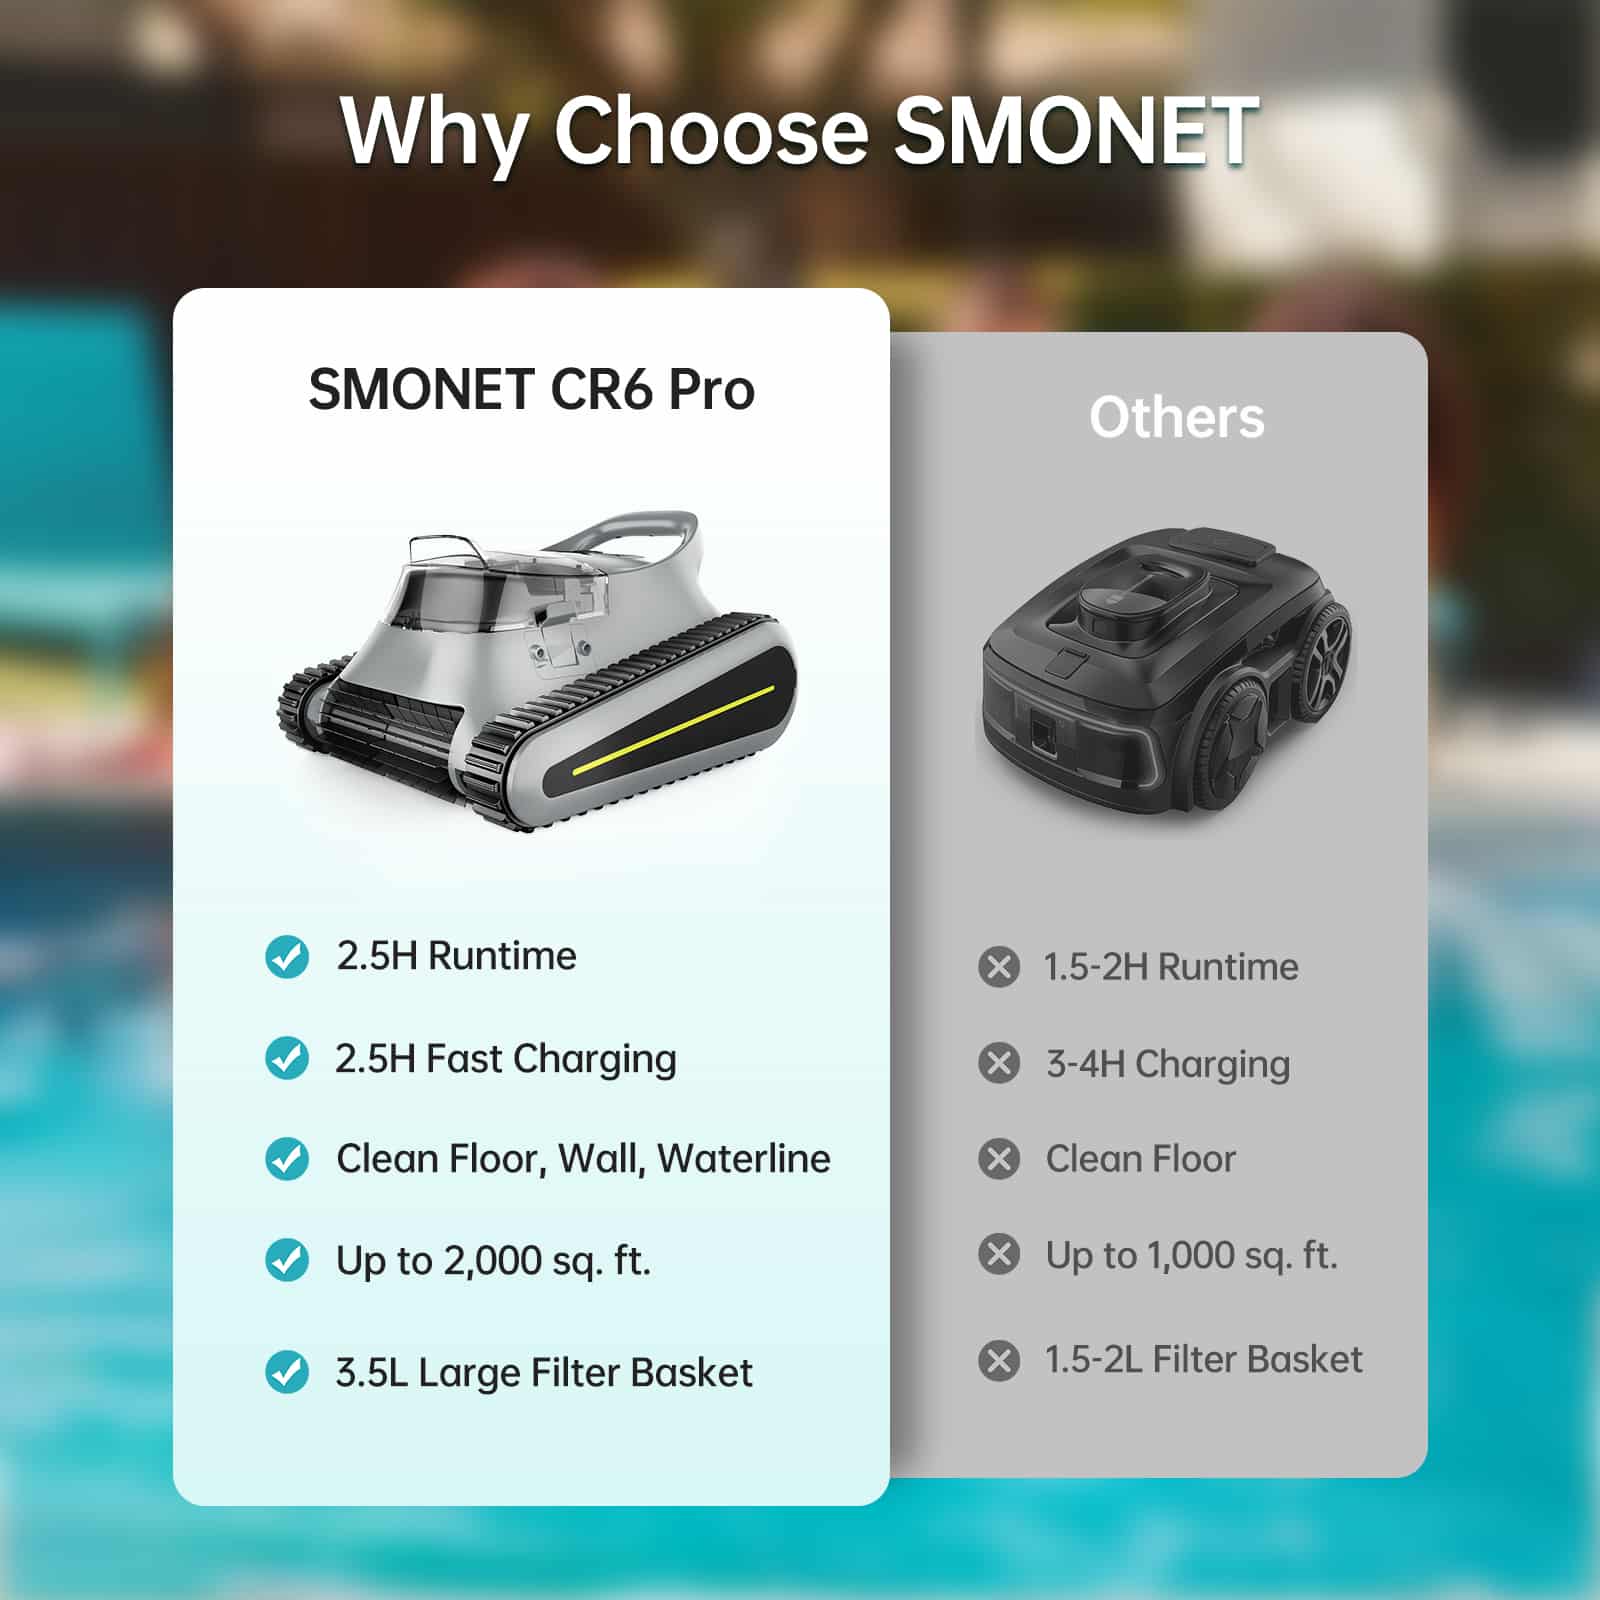 CR6 PRO Grey Smonet robotic pool cleaners for inground pools